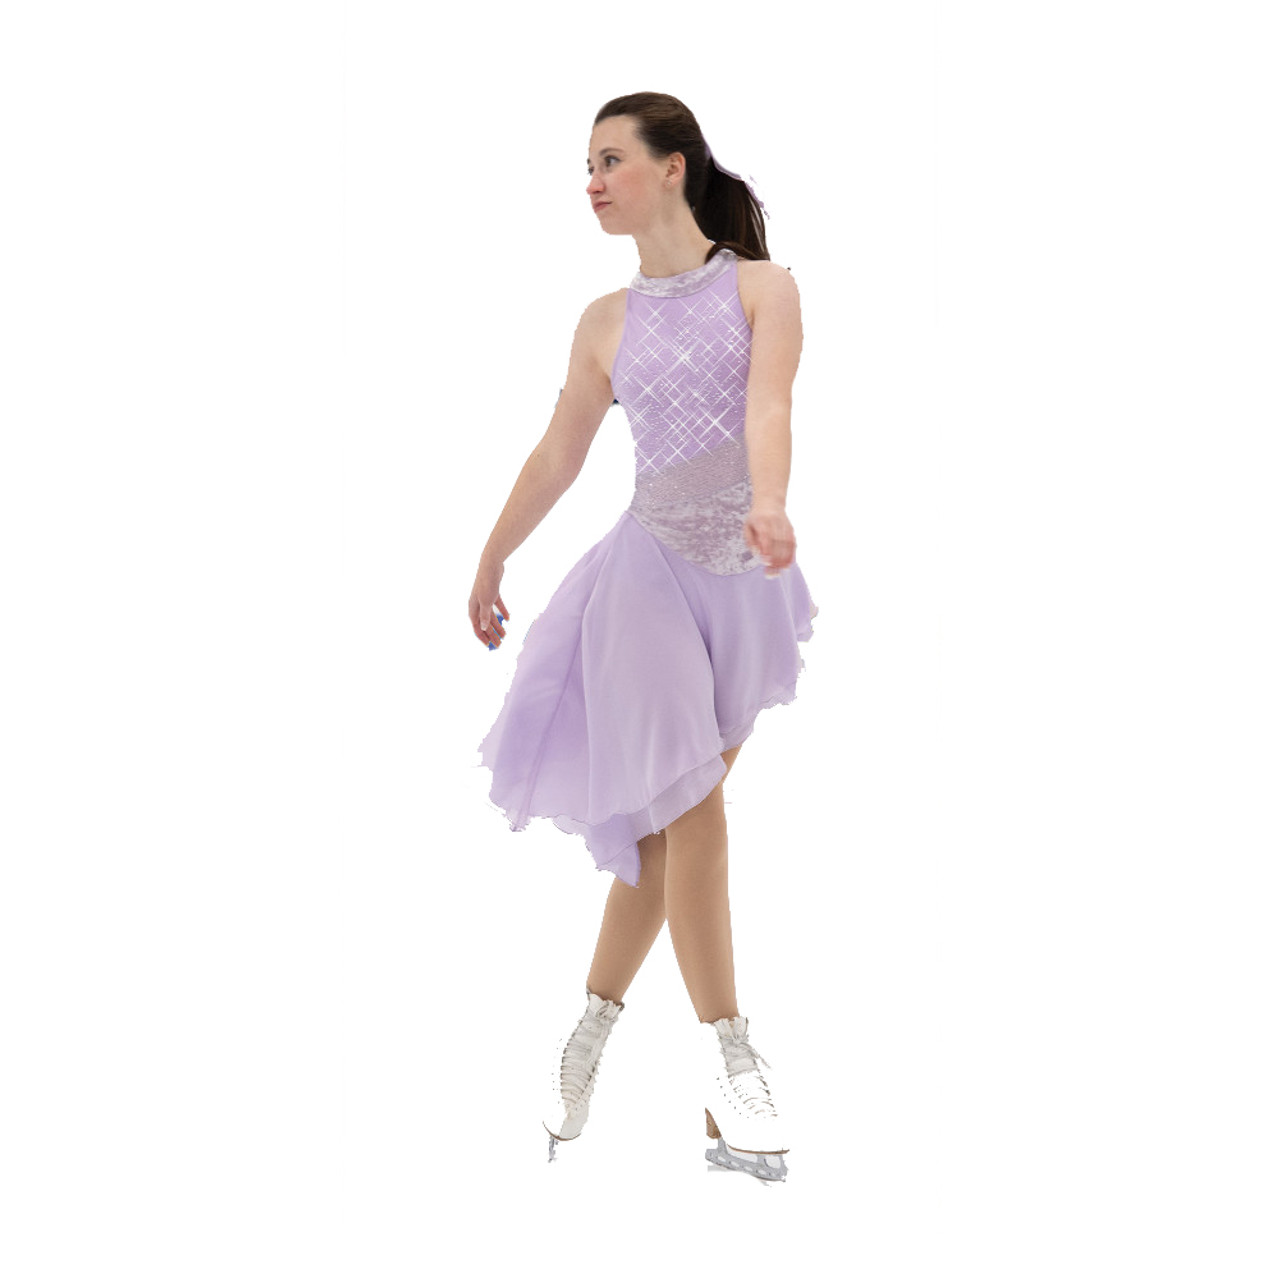 Skates for Less, Inc. - Jerry's Figure Skating Dress 81 - Splash of Lace ✓    Get Extra 15% OFF with the coupon below. ❗️Promo Code: JD17FS (valid until  April,6 ) A